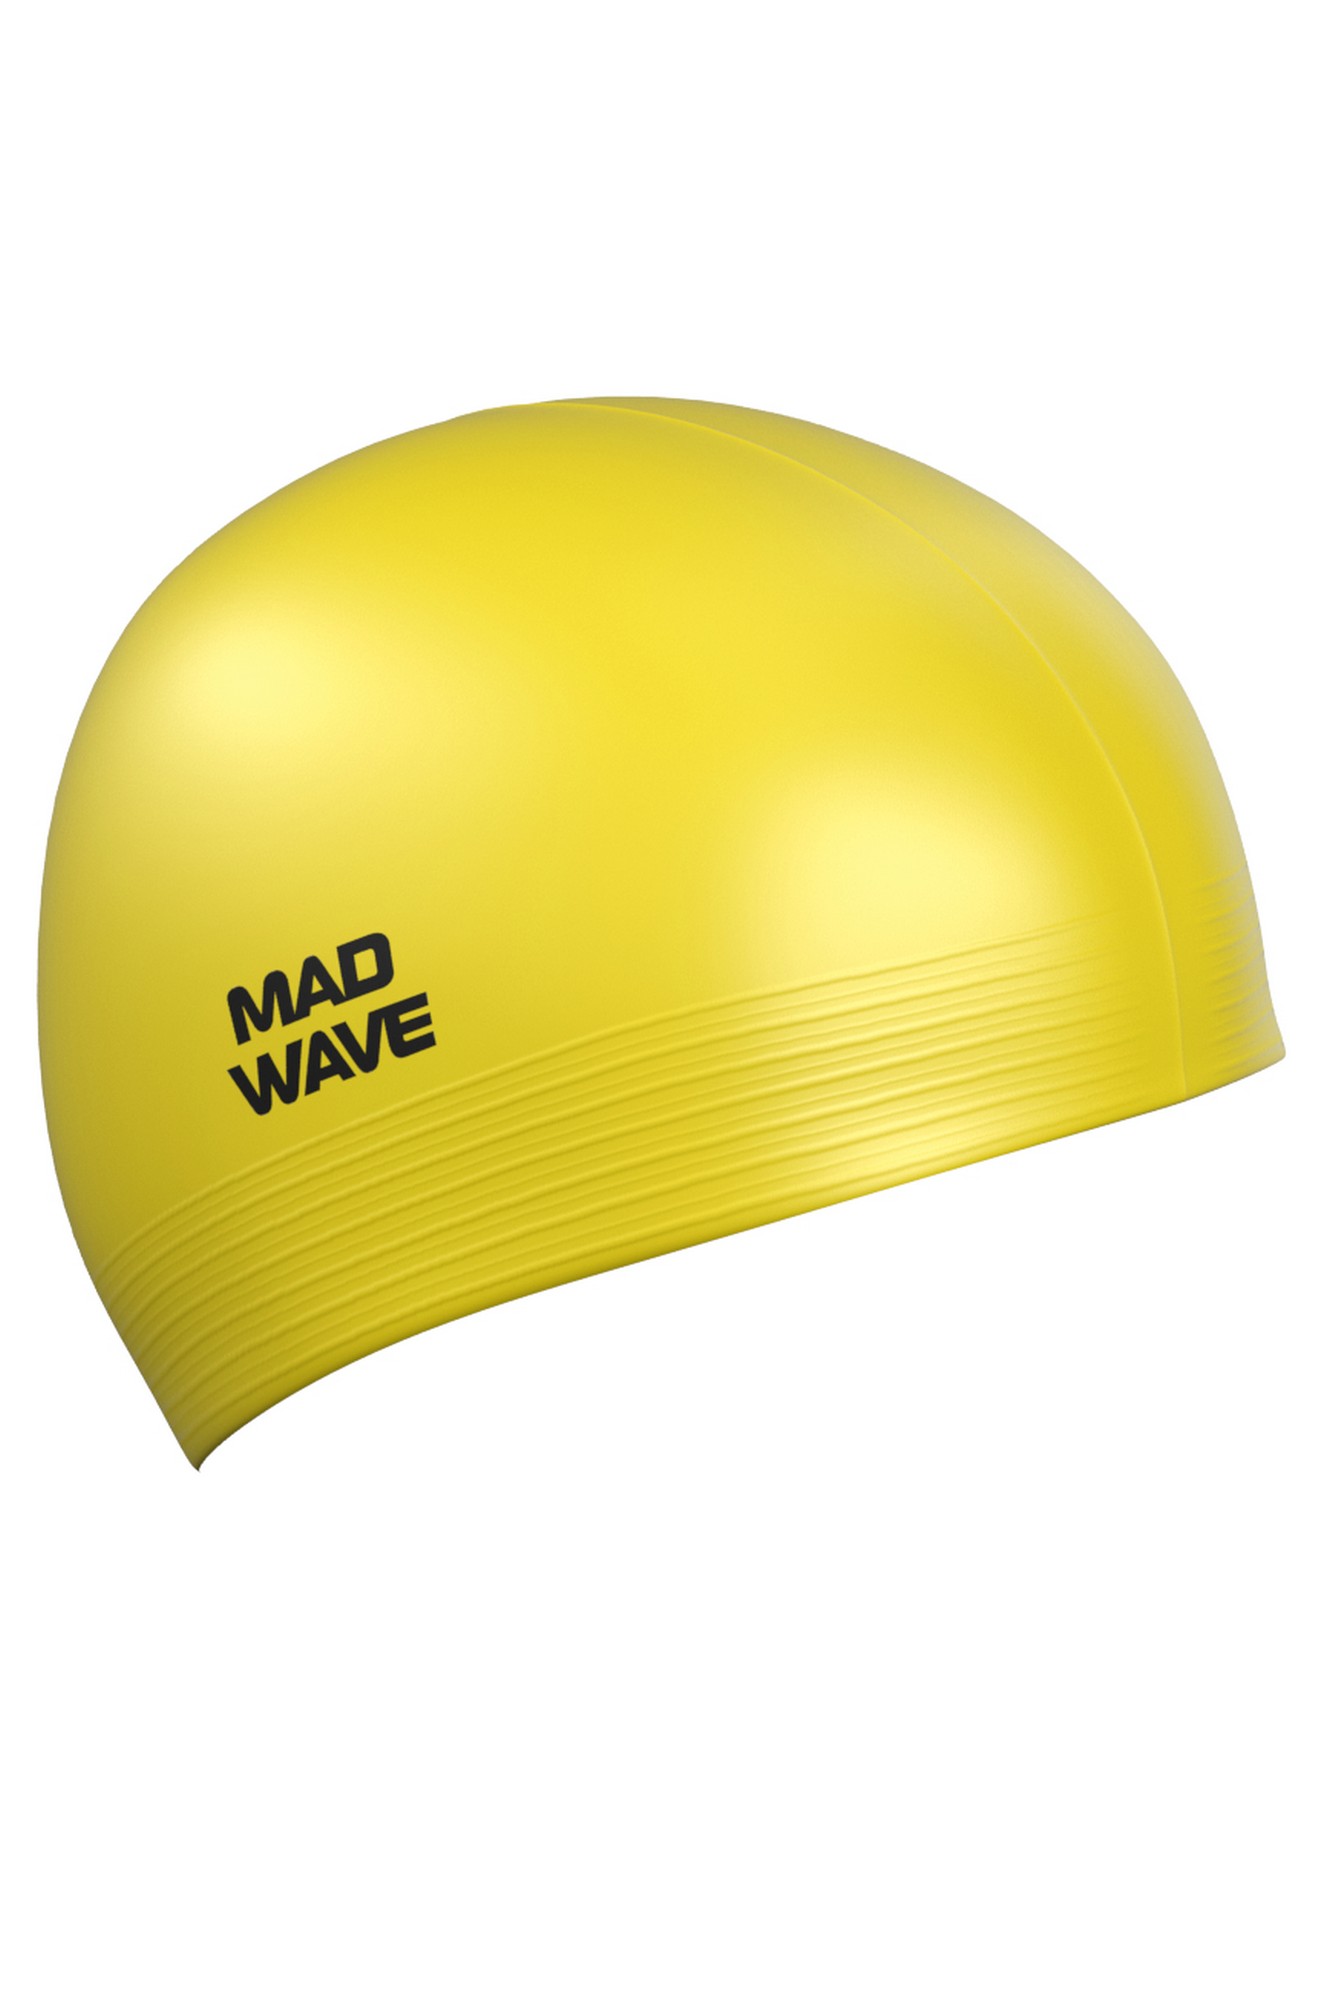   Mad Wave Solid Soft M0565 02 0 06W 